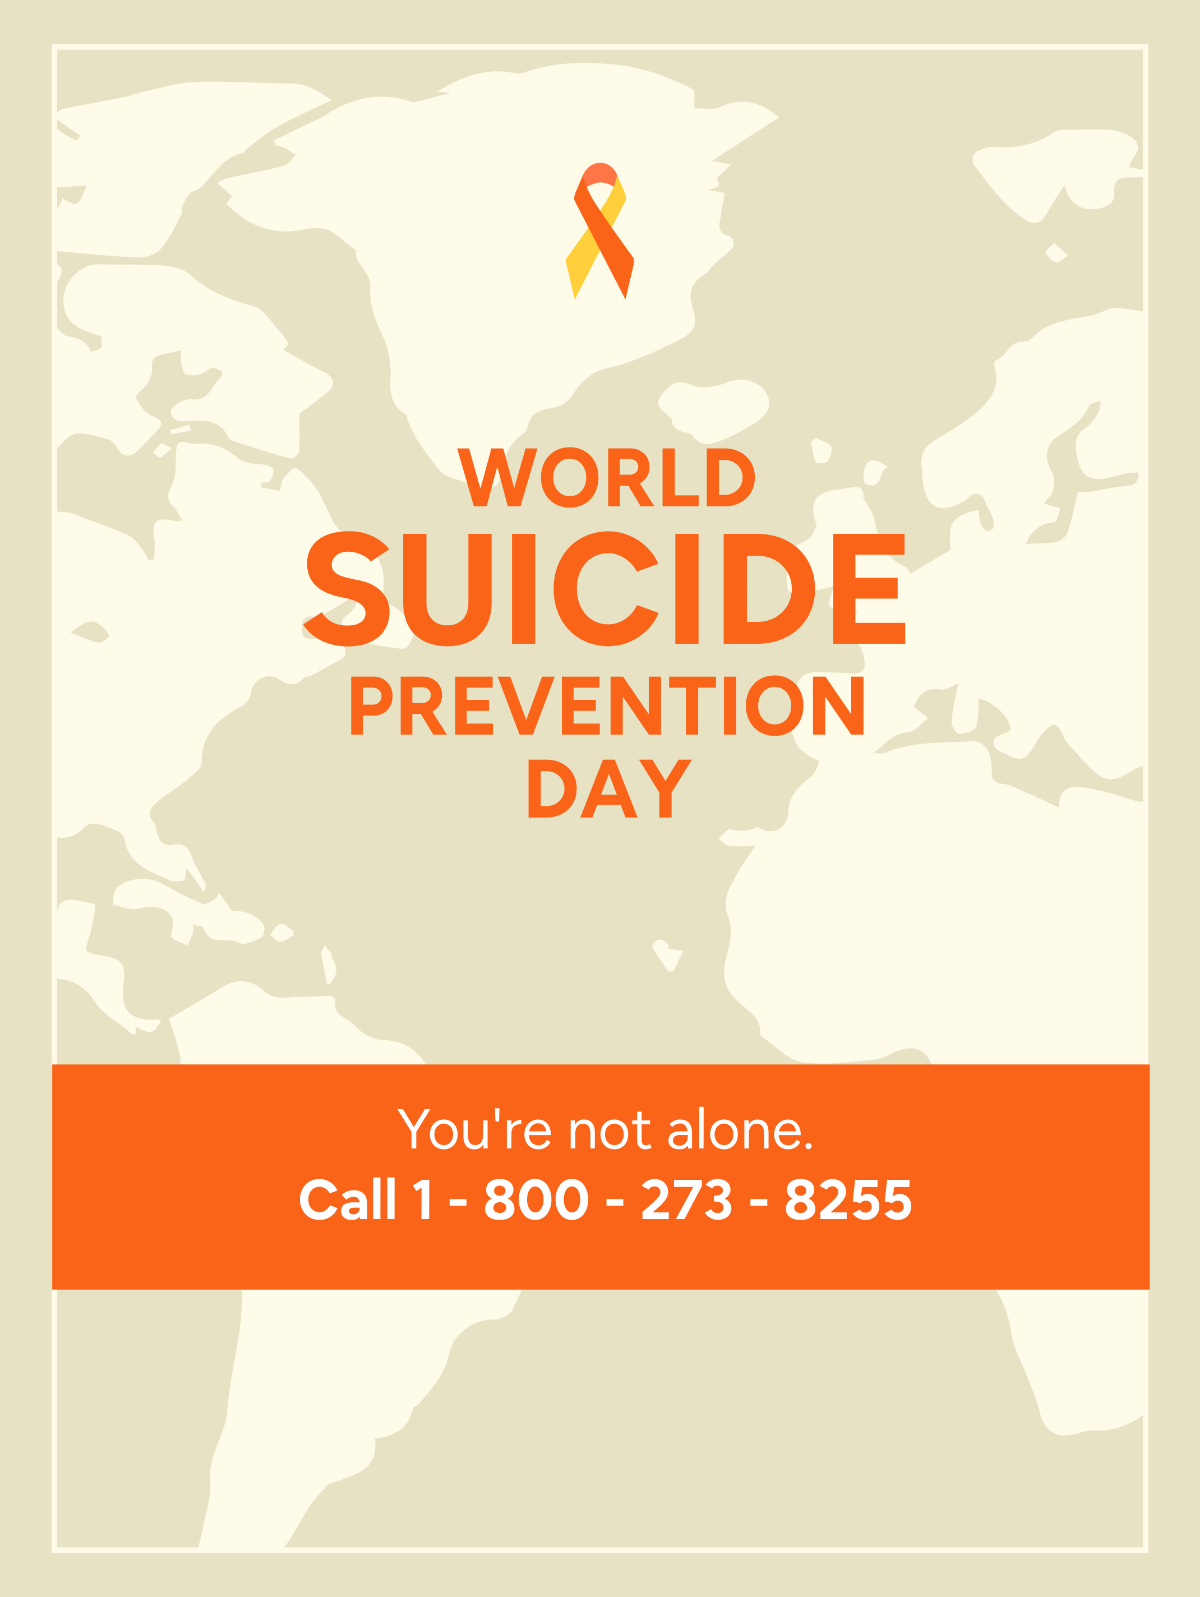 World Suicide Prevention Day Threads Post Template